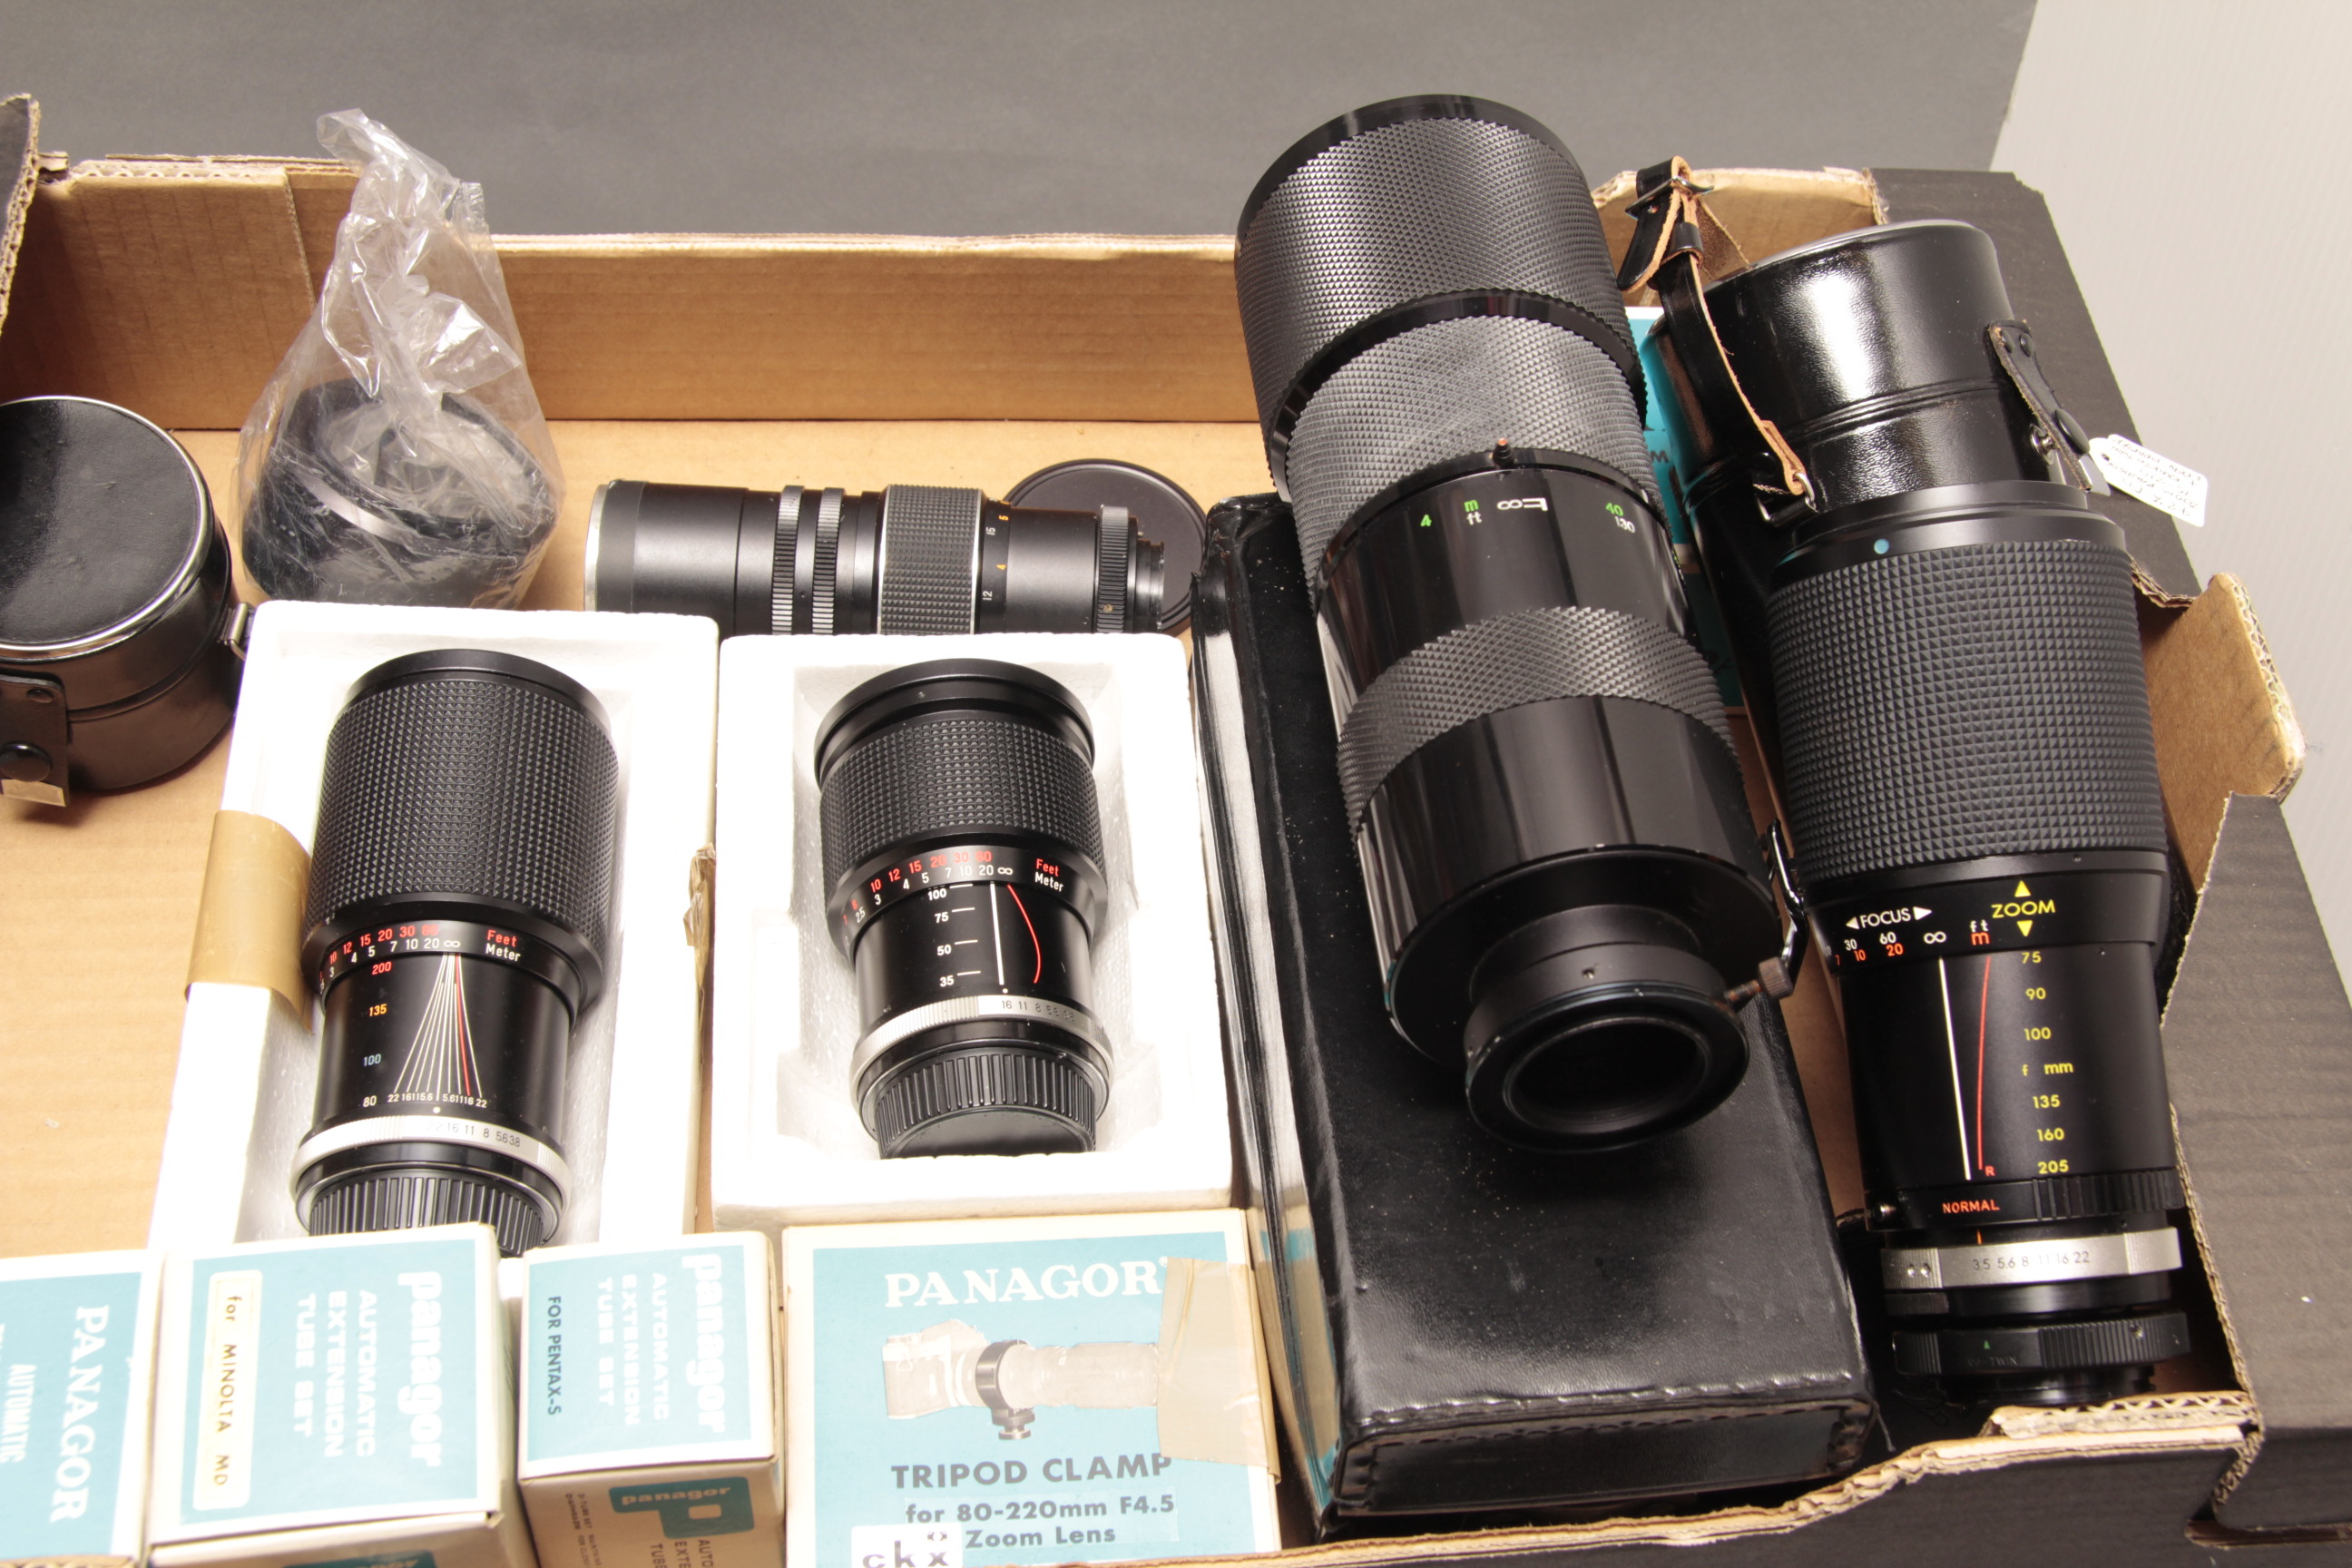 Panagor Zoom Lenses, 35-100mm, 80-200mm and 75-205mm samples, a Sigma 600mm mirror lens and more